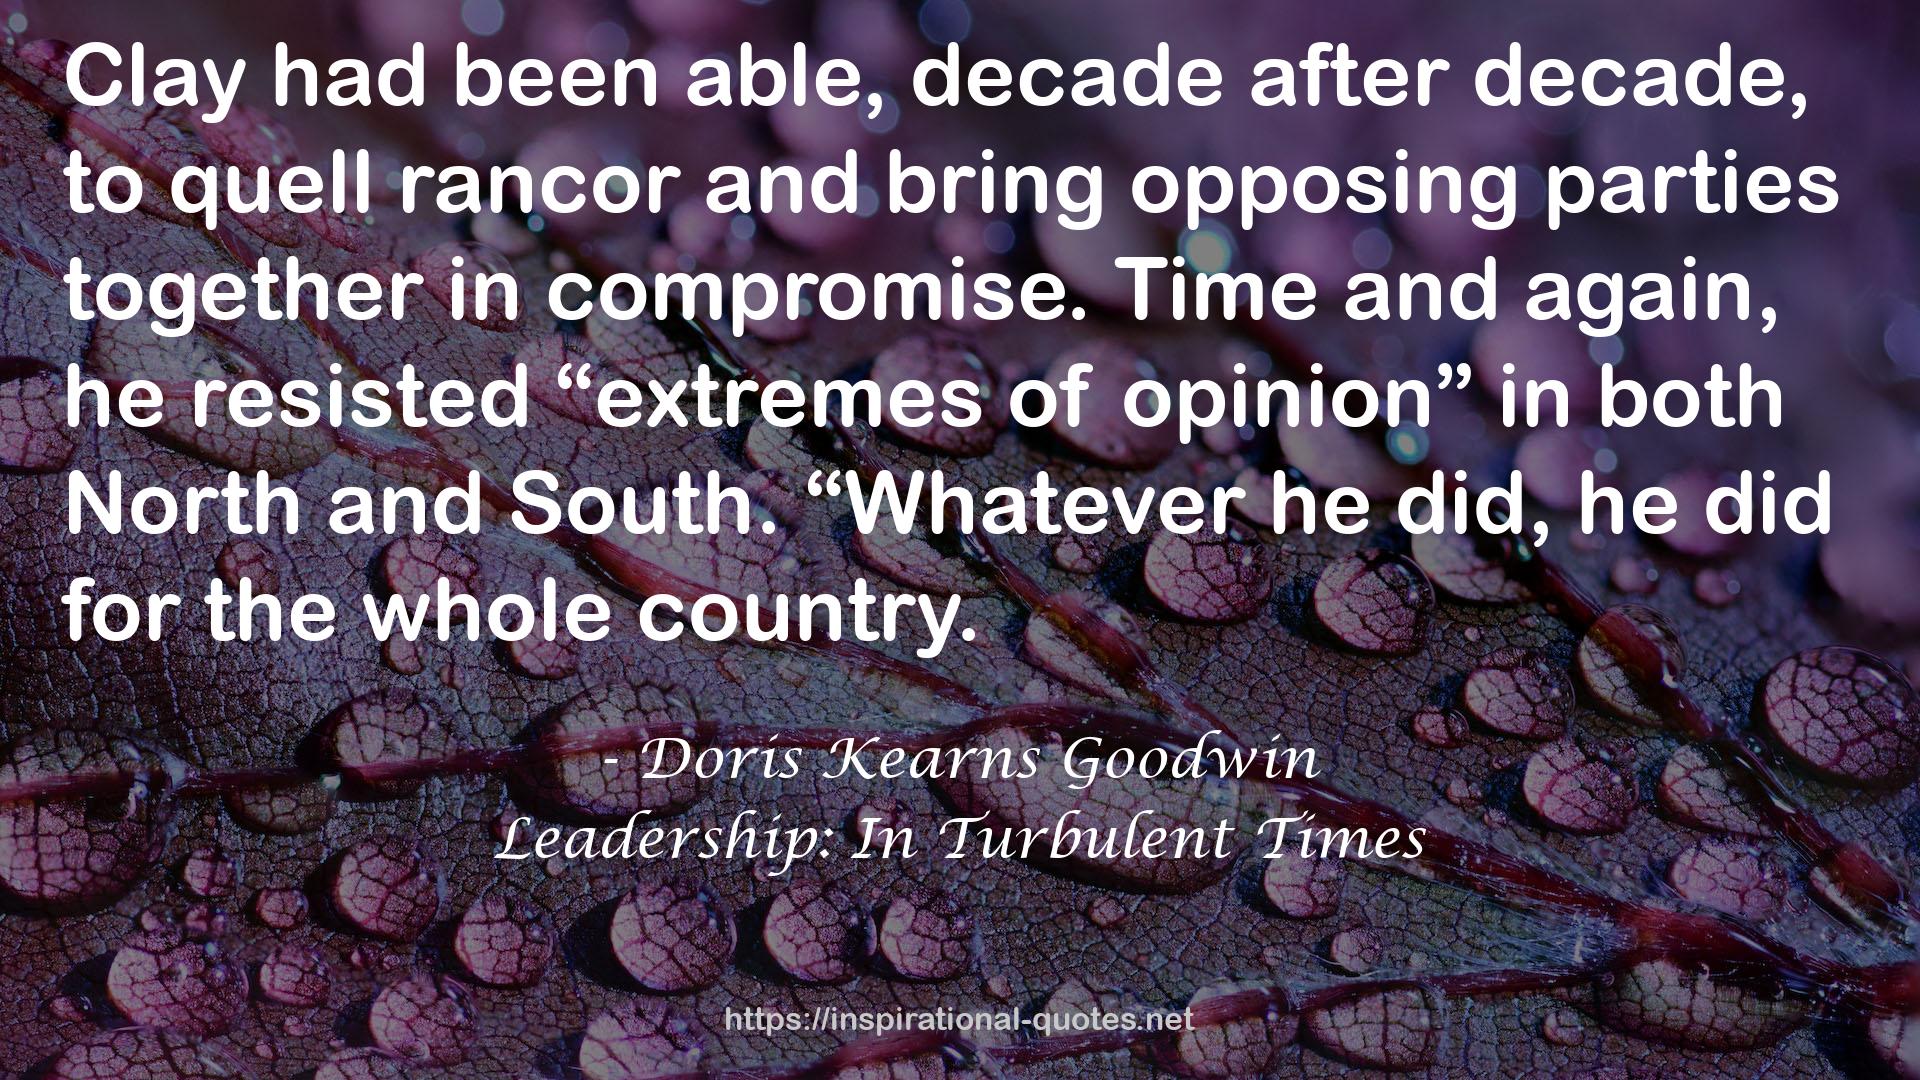 Leadership: In Turbulent Times QUOTES